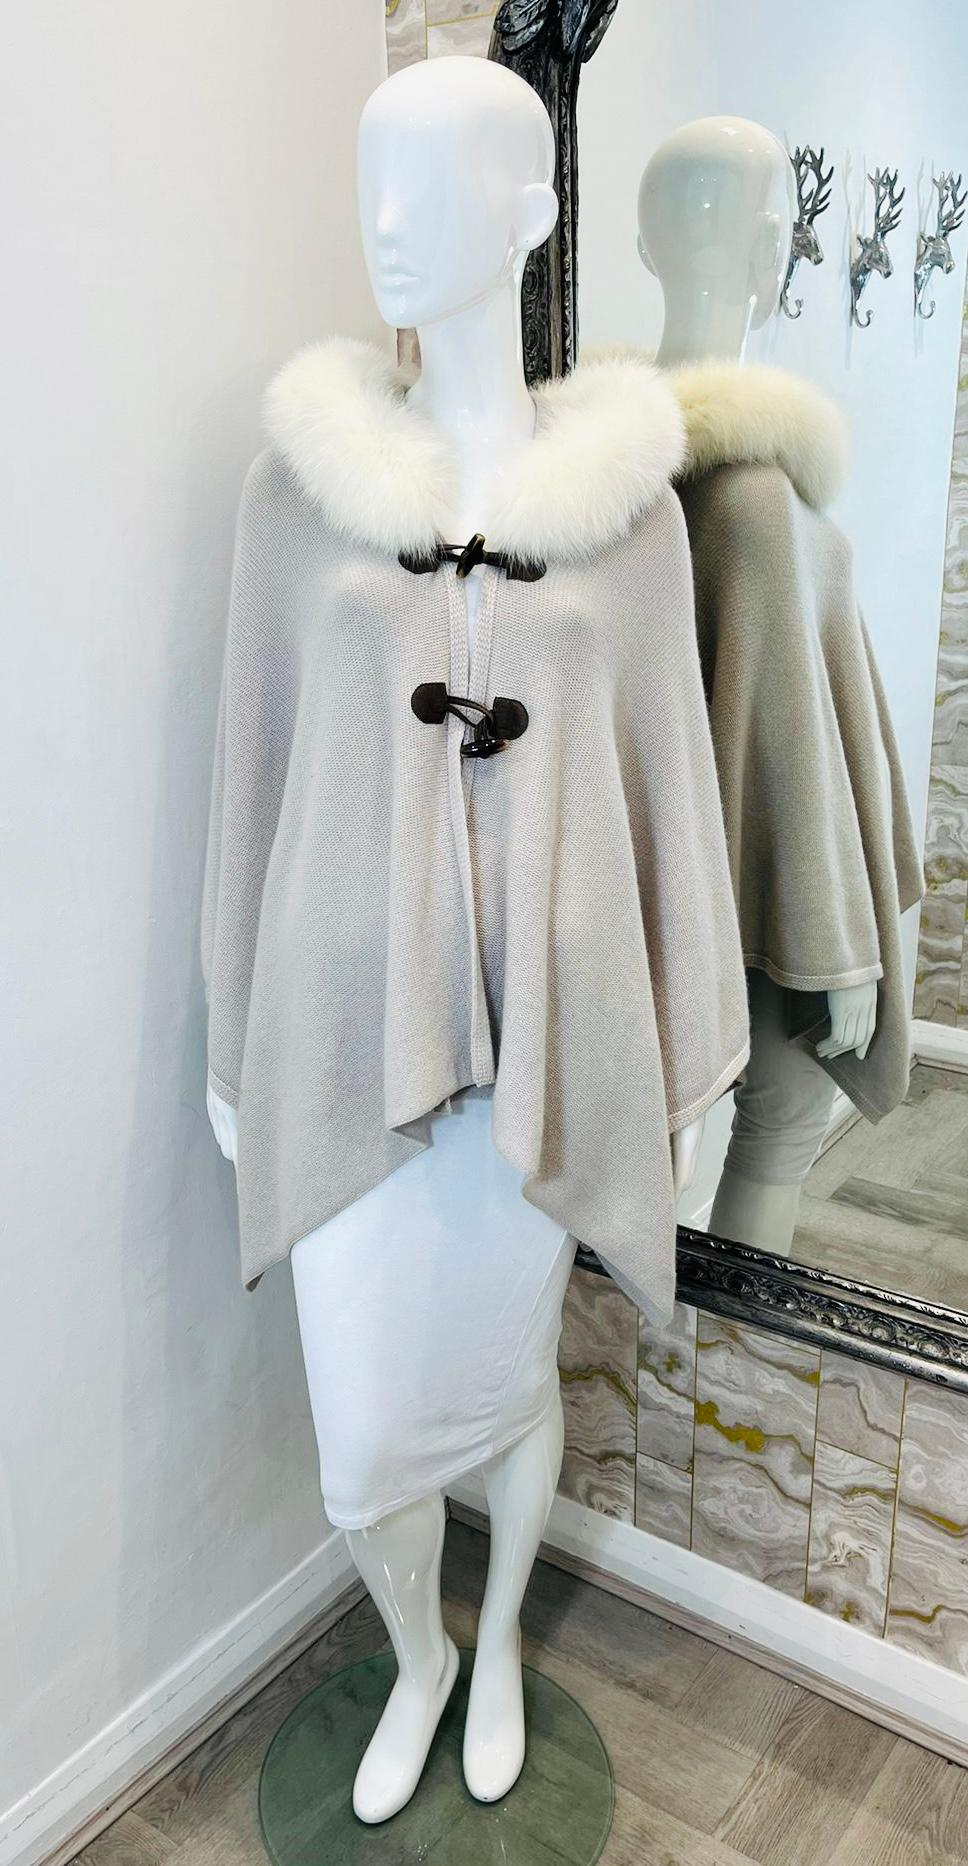 Doriani Rabbit Fur & Cashmere Cape

Light grey cape designed with white fur trimmed hood.

Detailed with resin leather horn buckle closure to the centre.

Size – M

Condition – Very Good

Composition – 100% Cashmere, Rabbit Fur